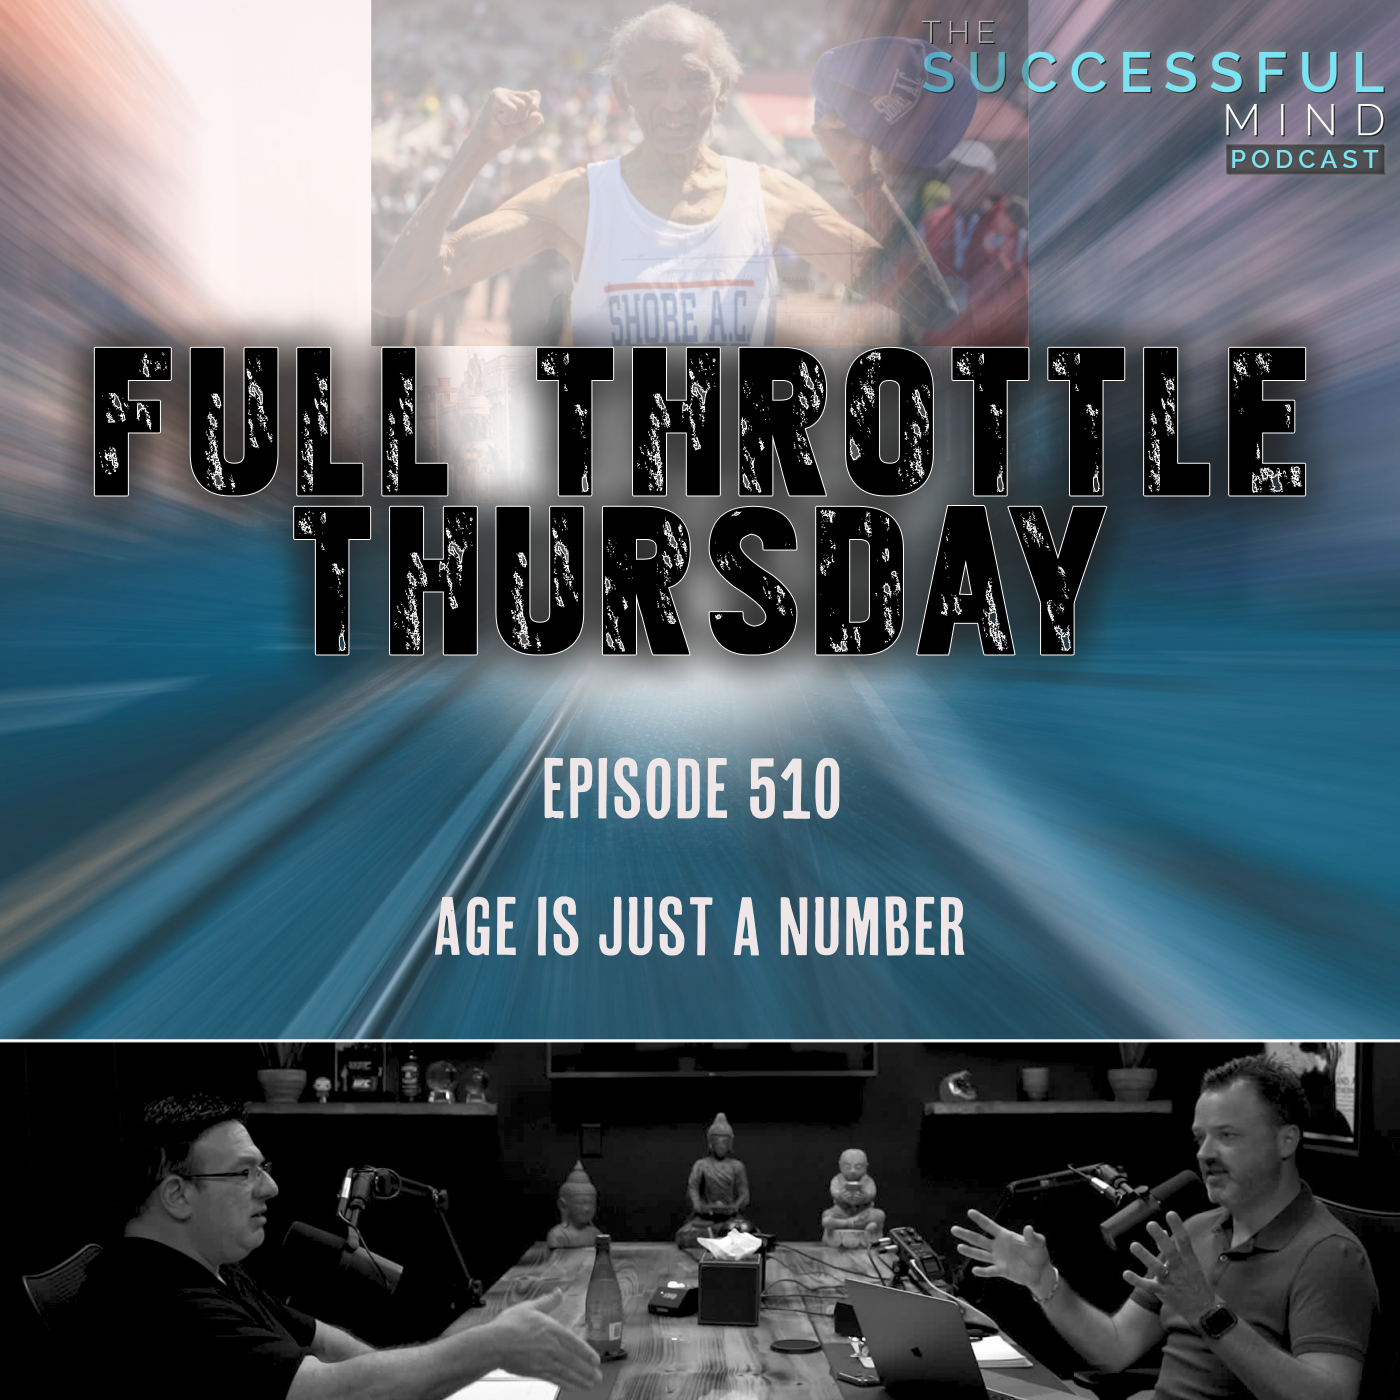 The Successful Mind Podcast - Full Throttle Thursday - Age is Just a Number